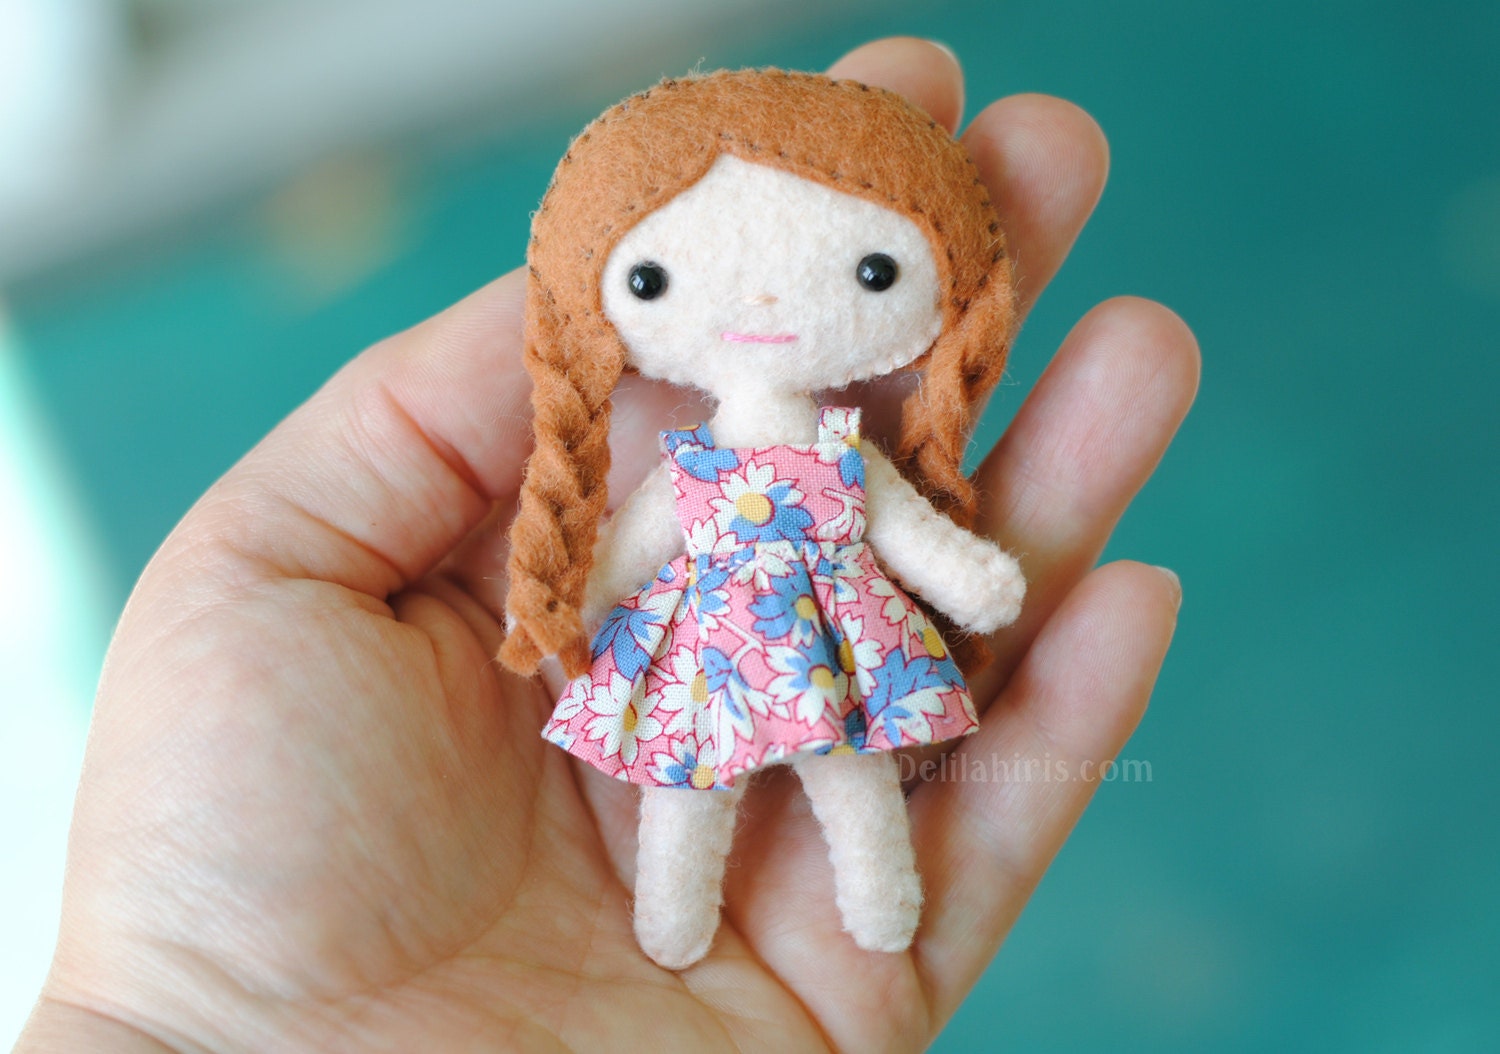 How to Make a Cloth Doll Armature -   Doll clothes, Doll patterns,  Doll clothes patterns